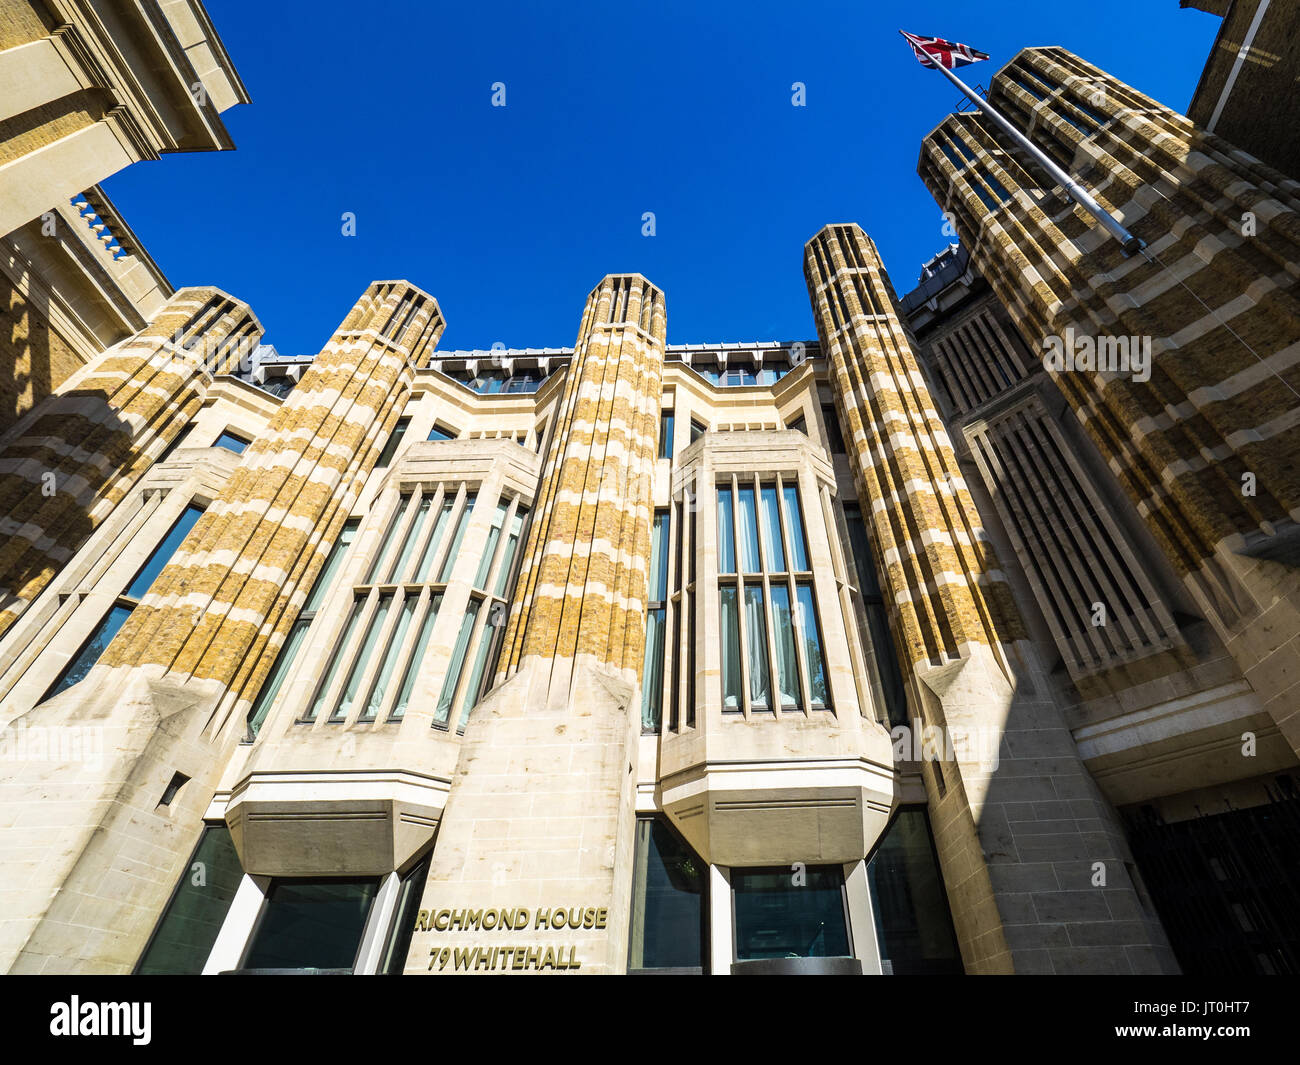 Richmond House i- headquarters building of the UK Government Department of Health in Whitehall in central London's government district. Stock Photo